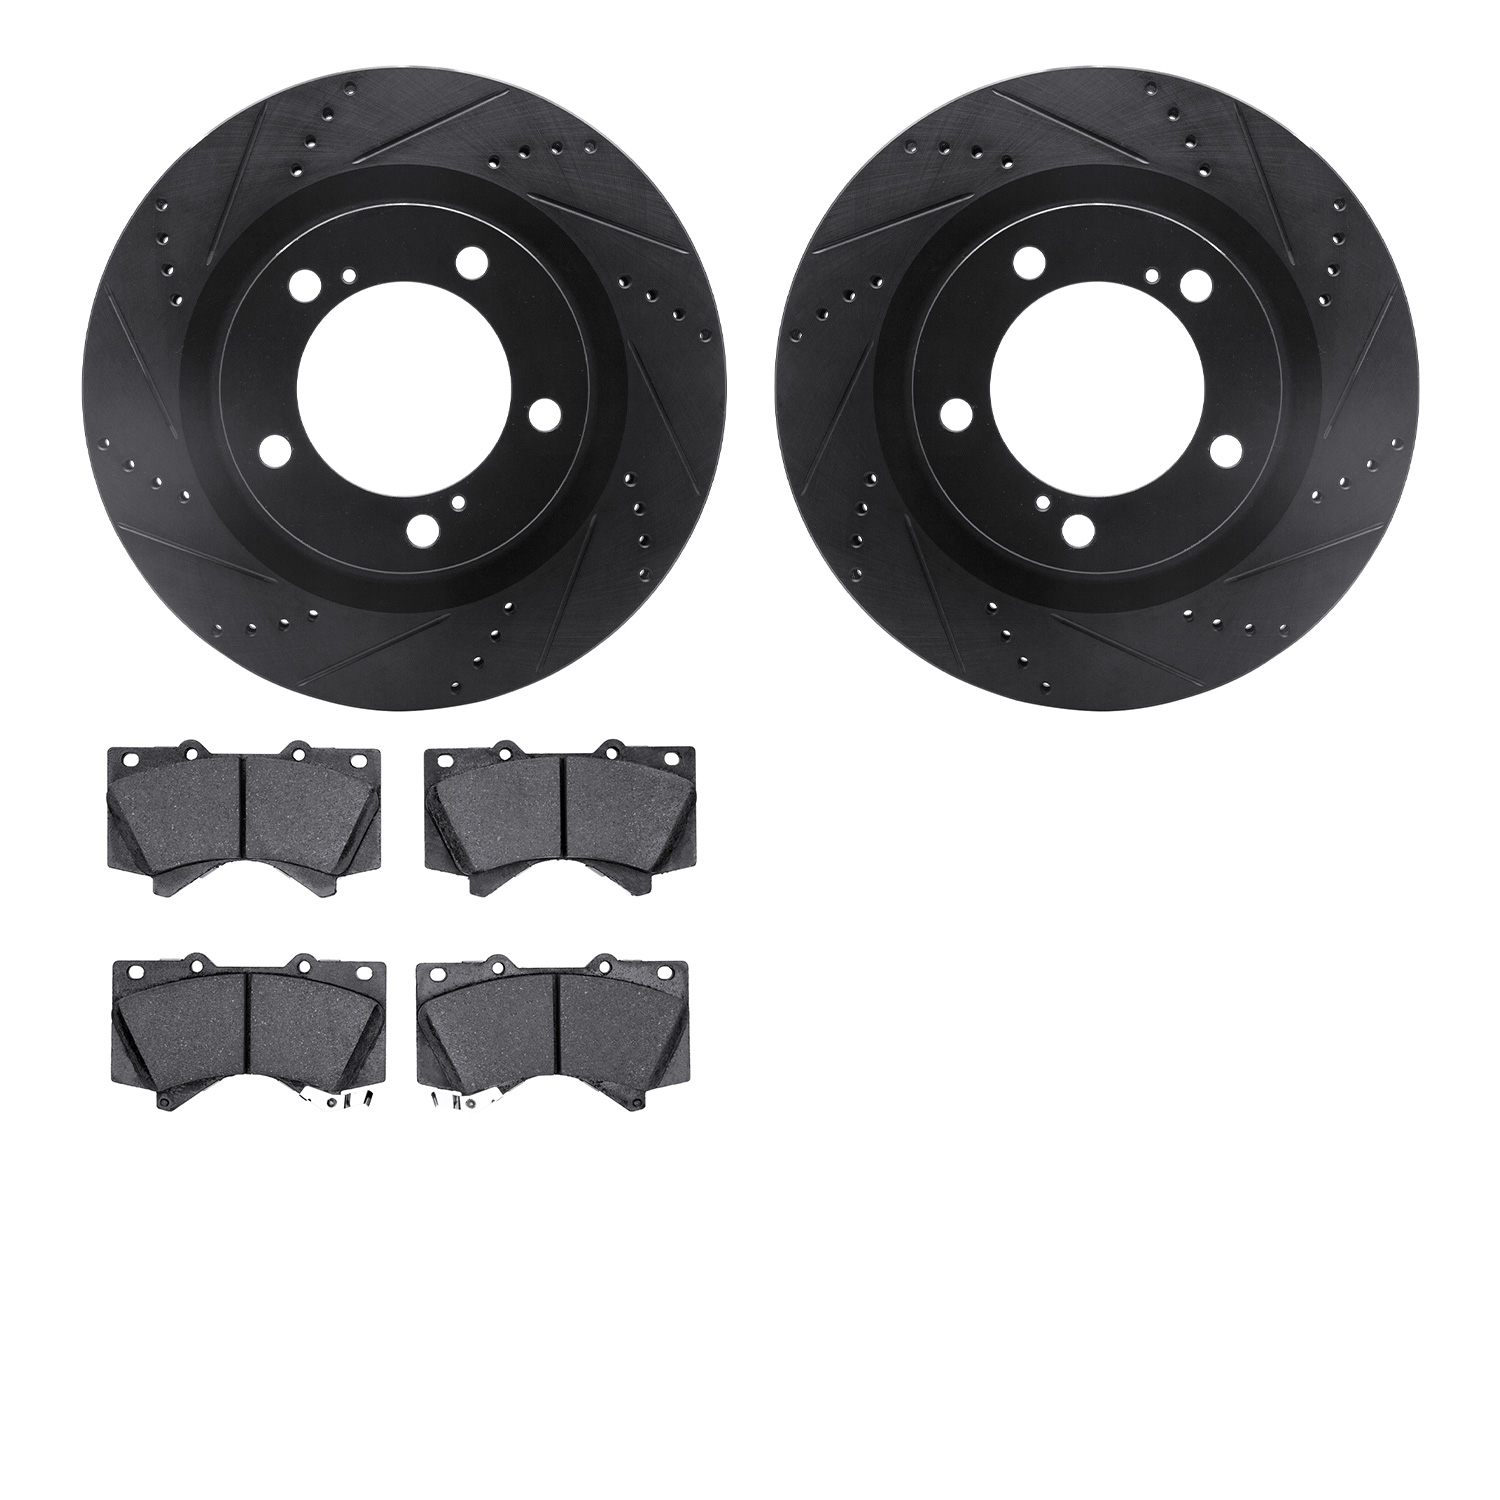 8402-76020 Drilled/Slotted Brake Rotors with Ultimate-Duty Brake Pads Kit [Black], Fits Select Lexus/Toyota/Scion, Position: Fro